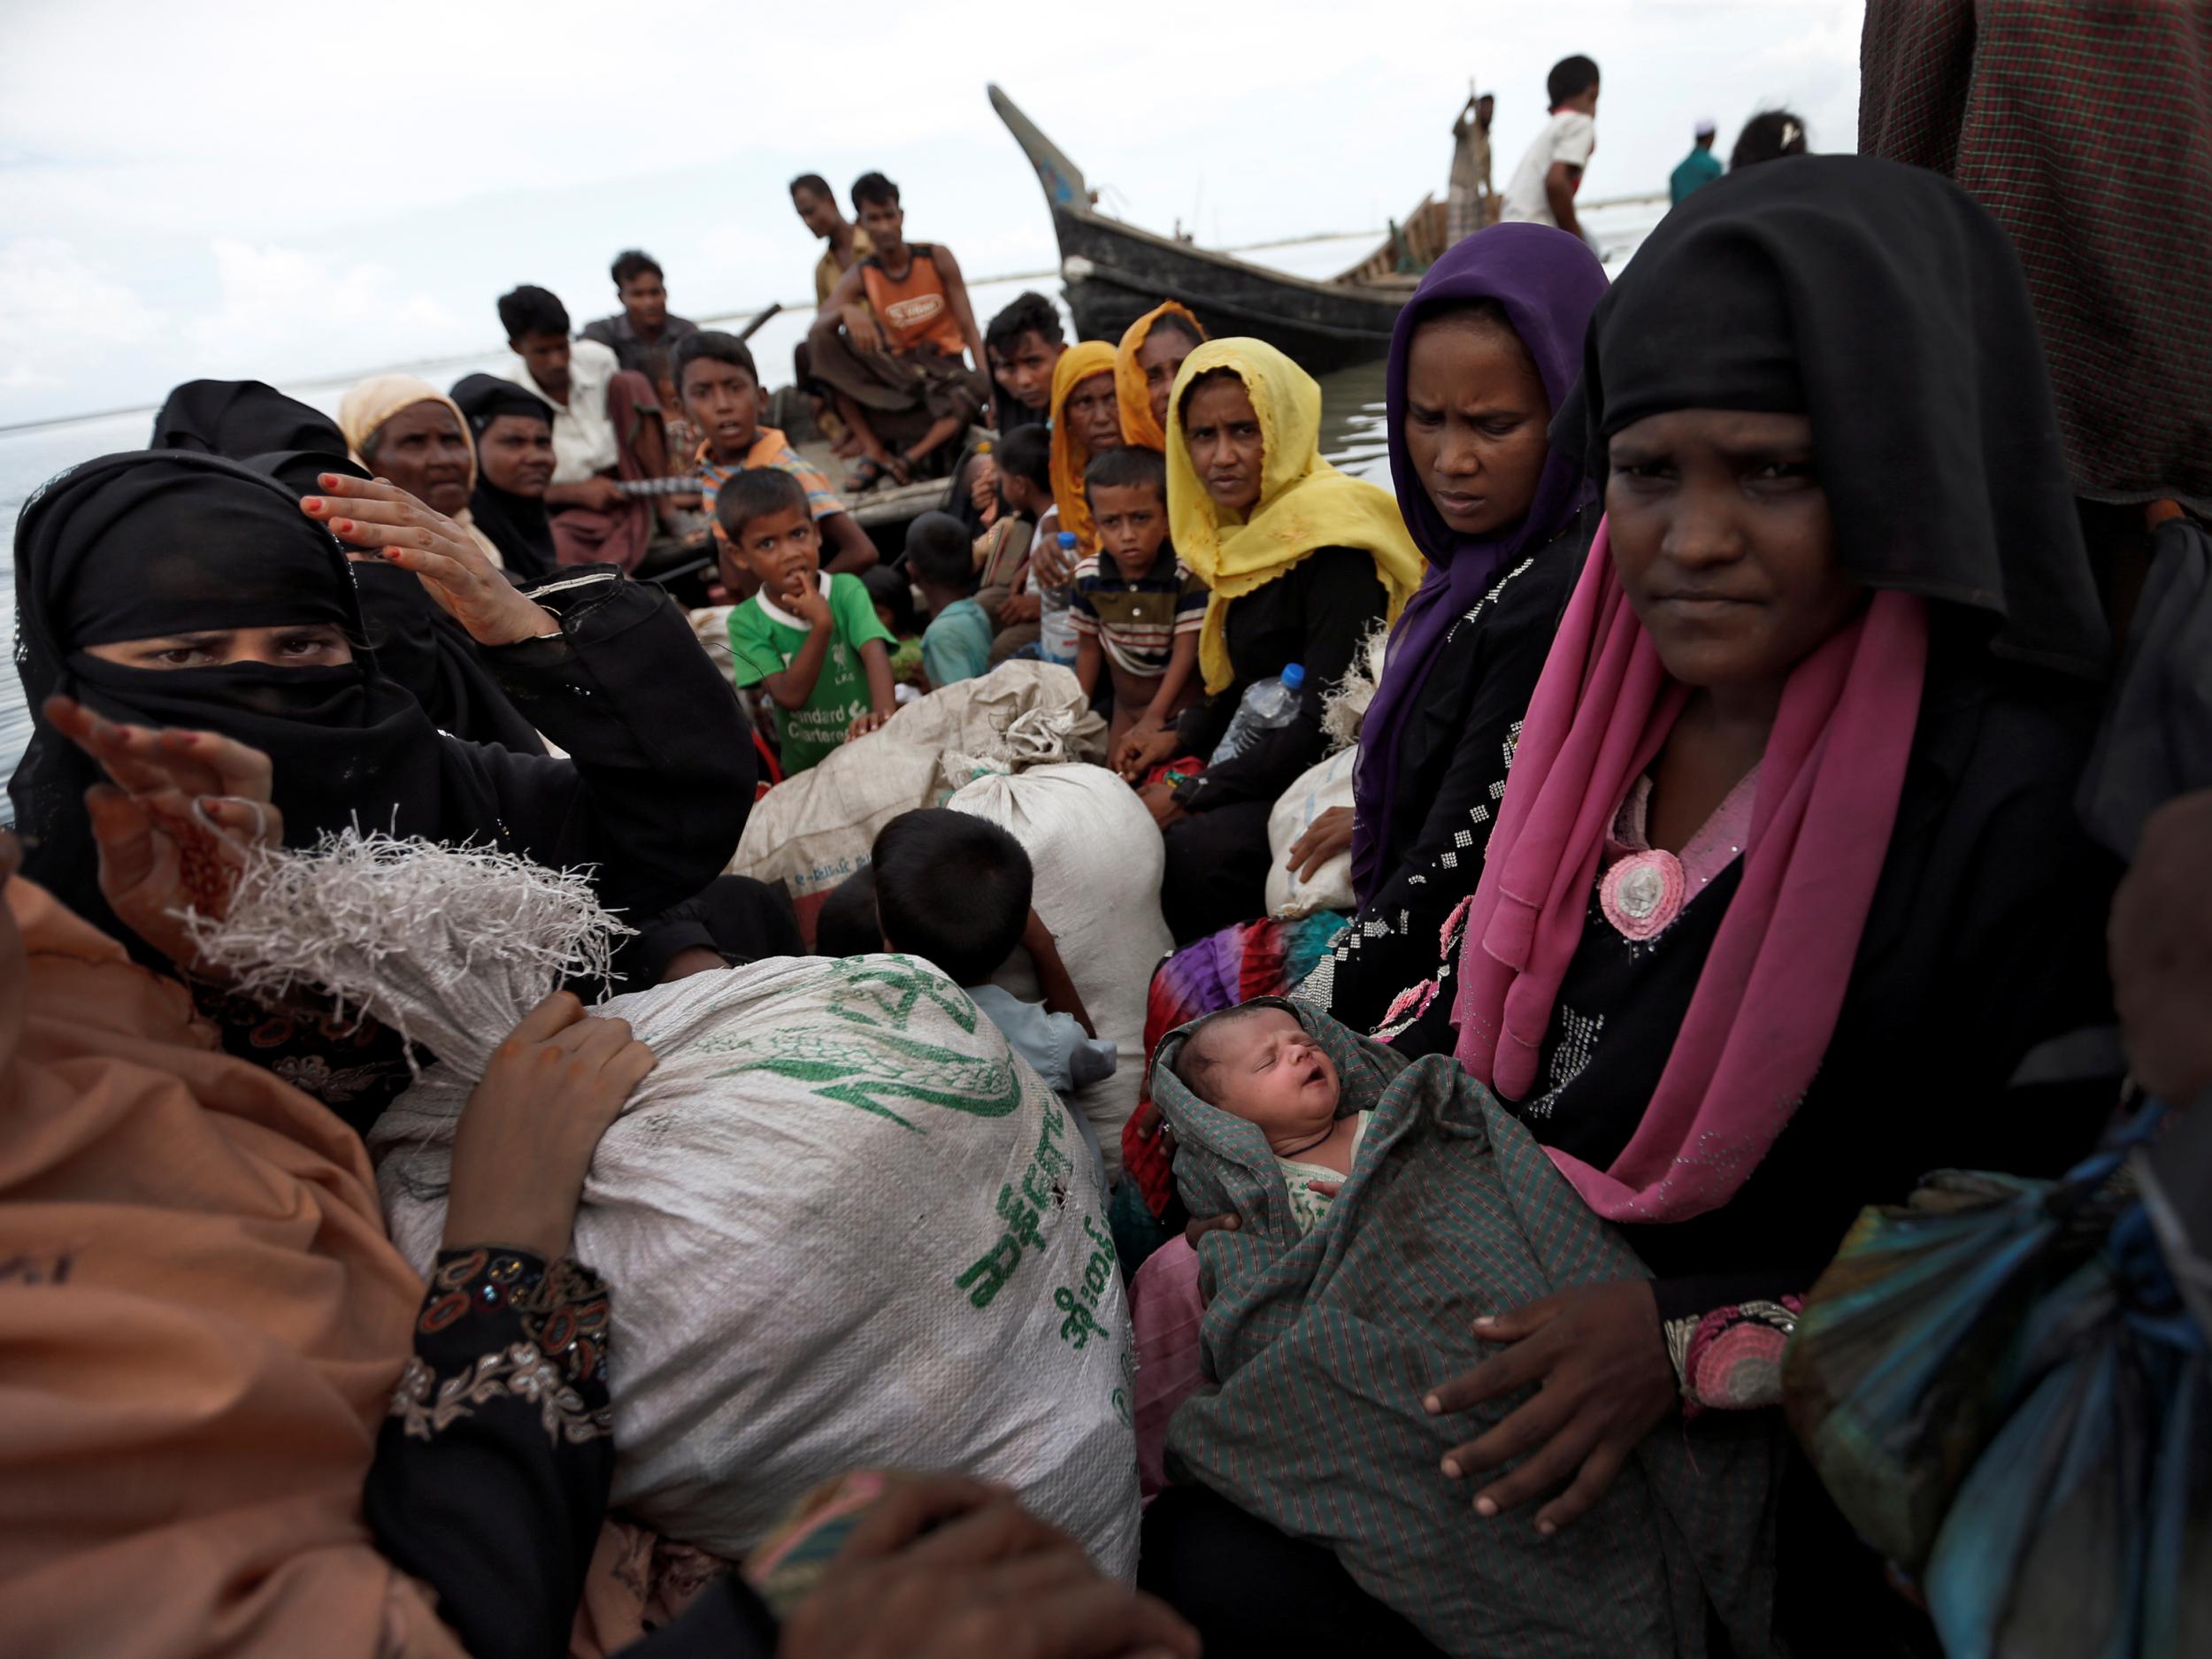 More than 20,000 Rohingya refugee women are believed to be pregnant